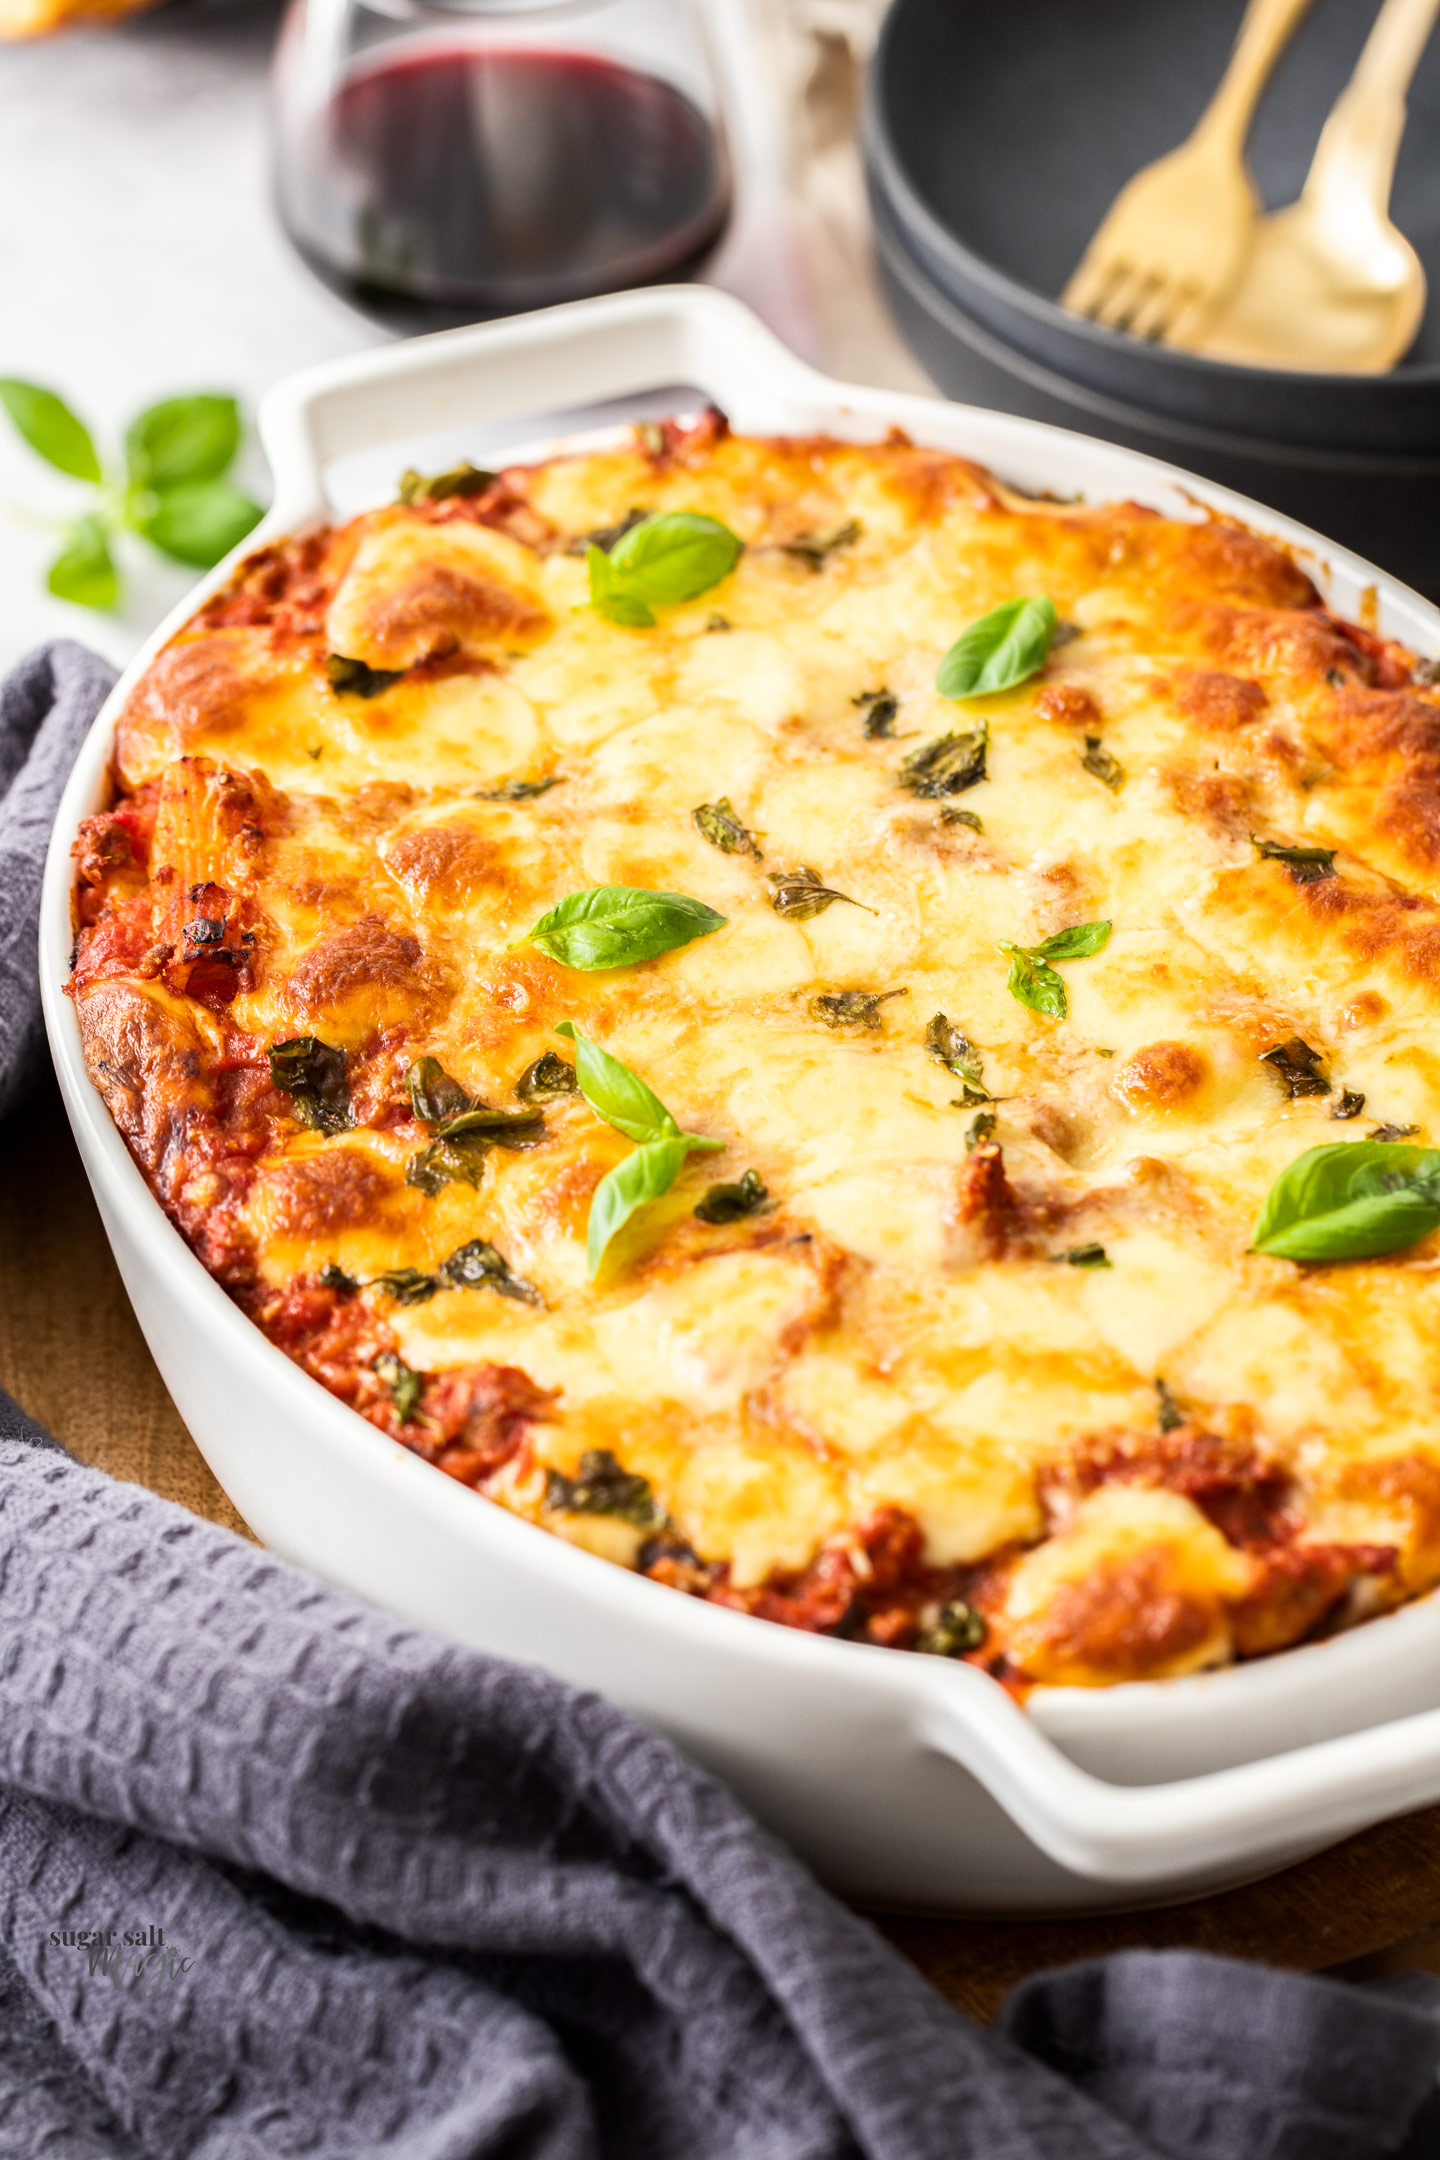 A casserole dish filled with baked rigatoni al forno.